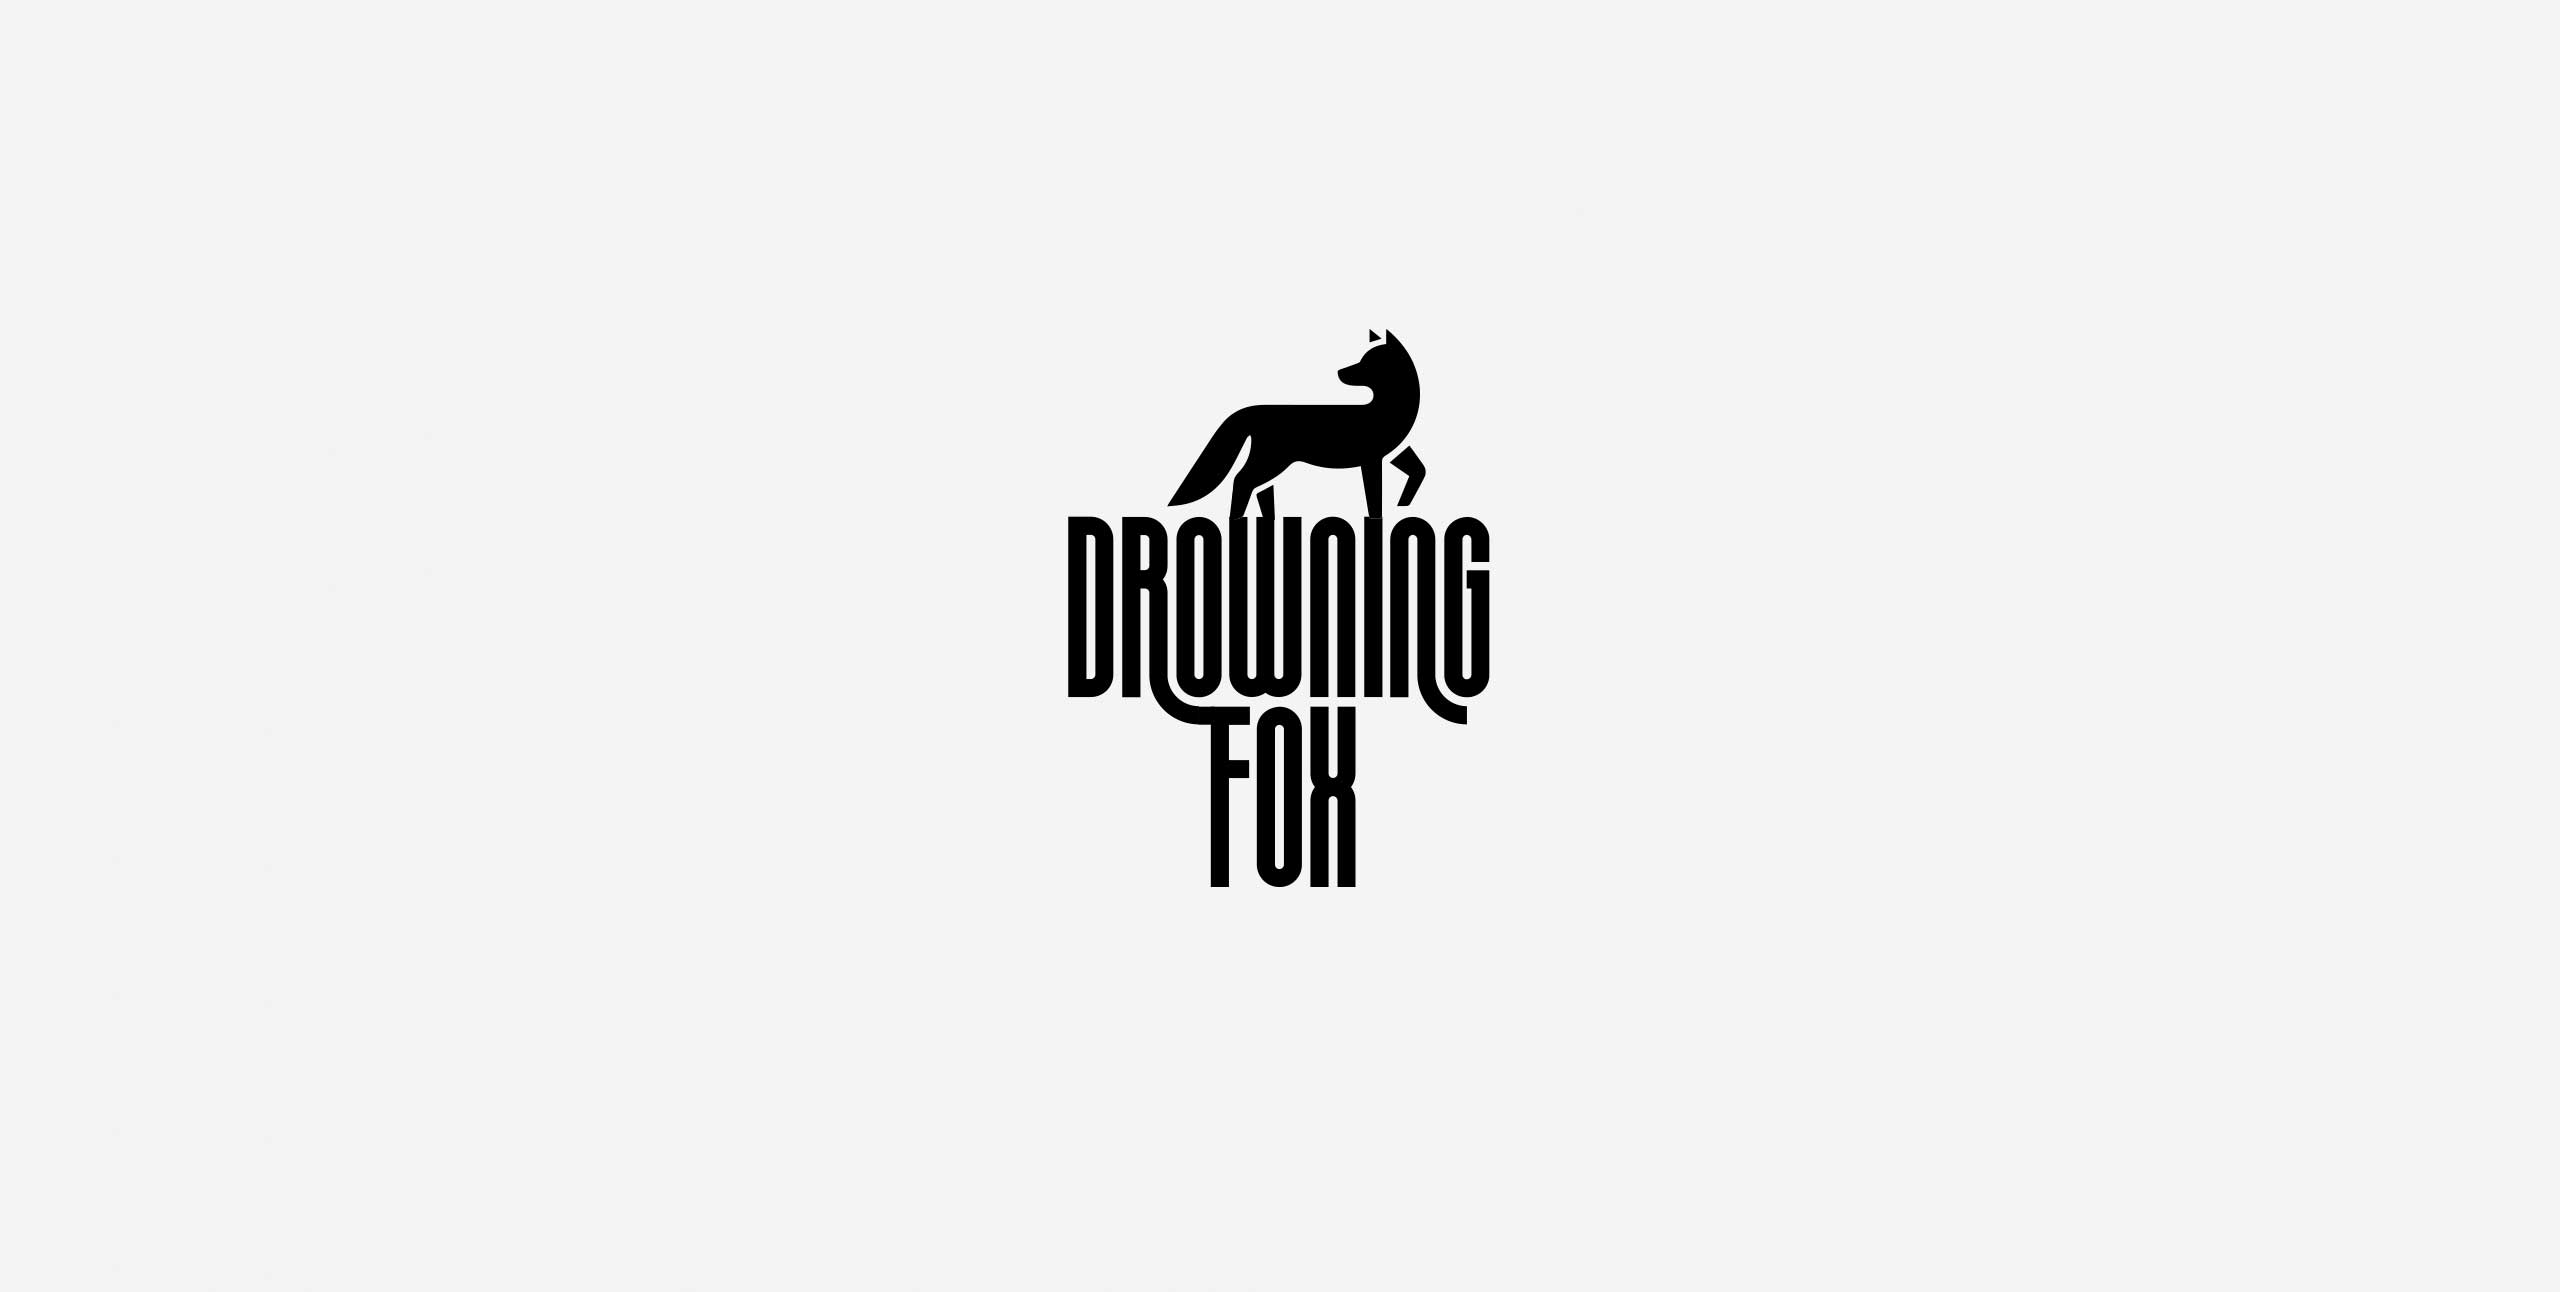 Logo Development | Design for Drinking Fox by the freelance Art Director Christoph Gey from Leipzig, Germany